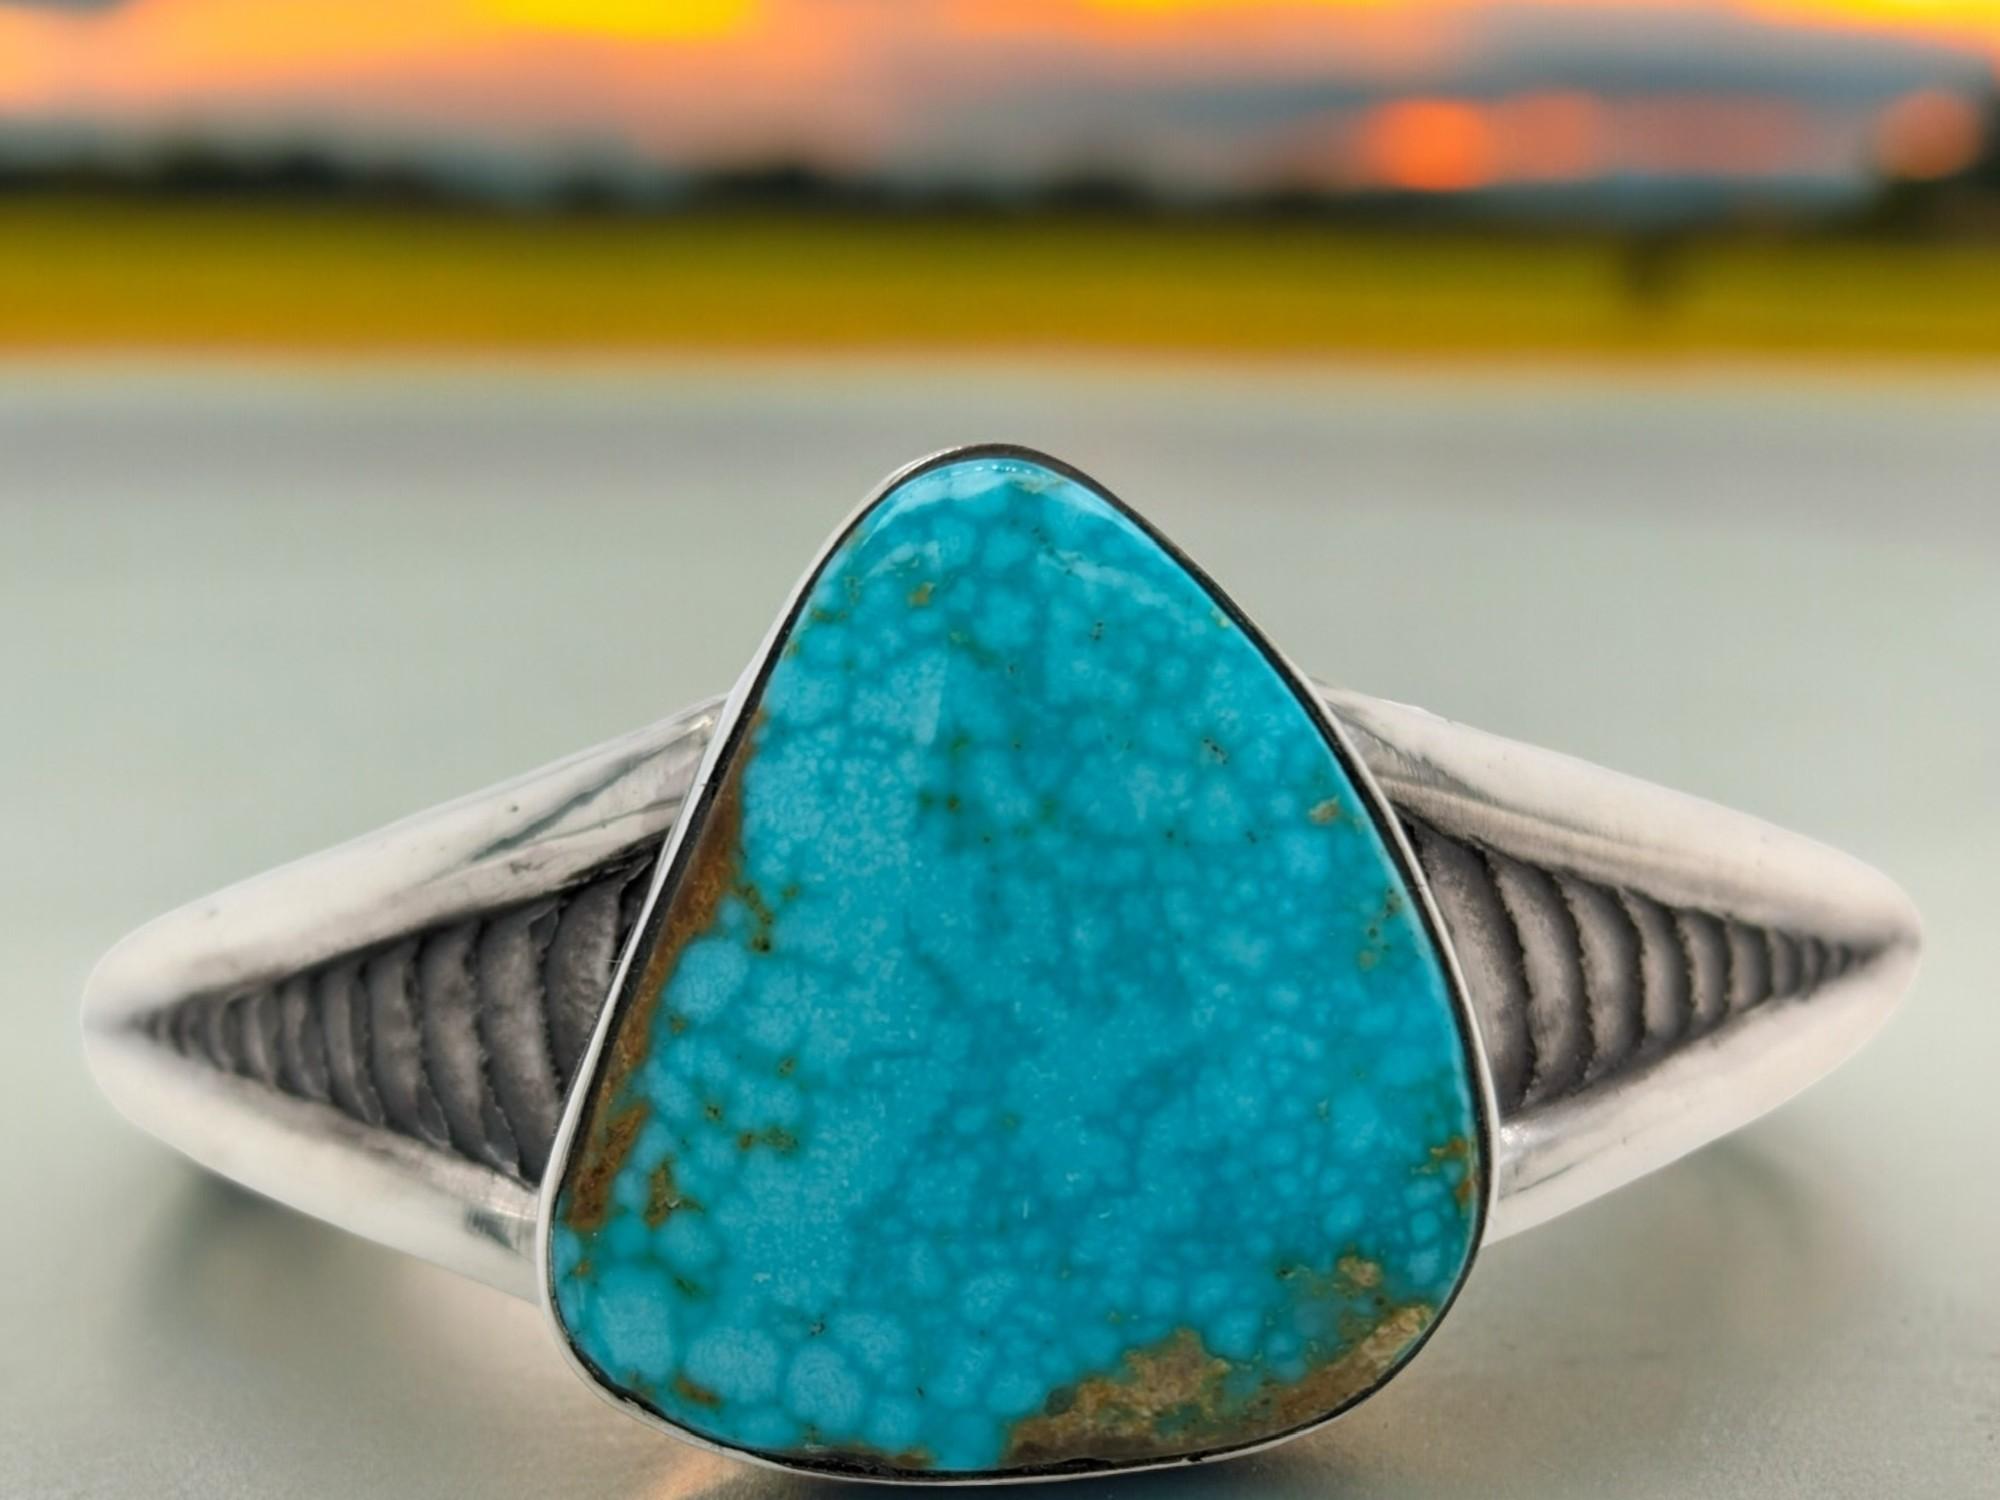 Striking Kingman Turquoise Cuff: Cuttle Bone Texture (Sterling Silver) For Sale 3